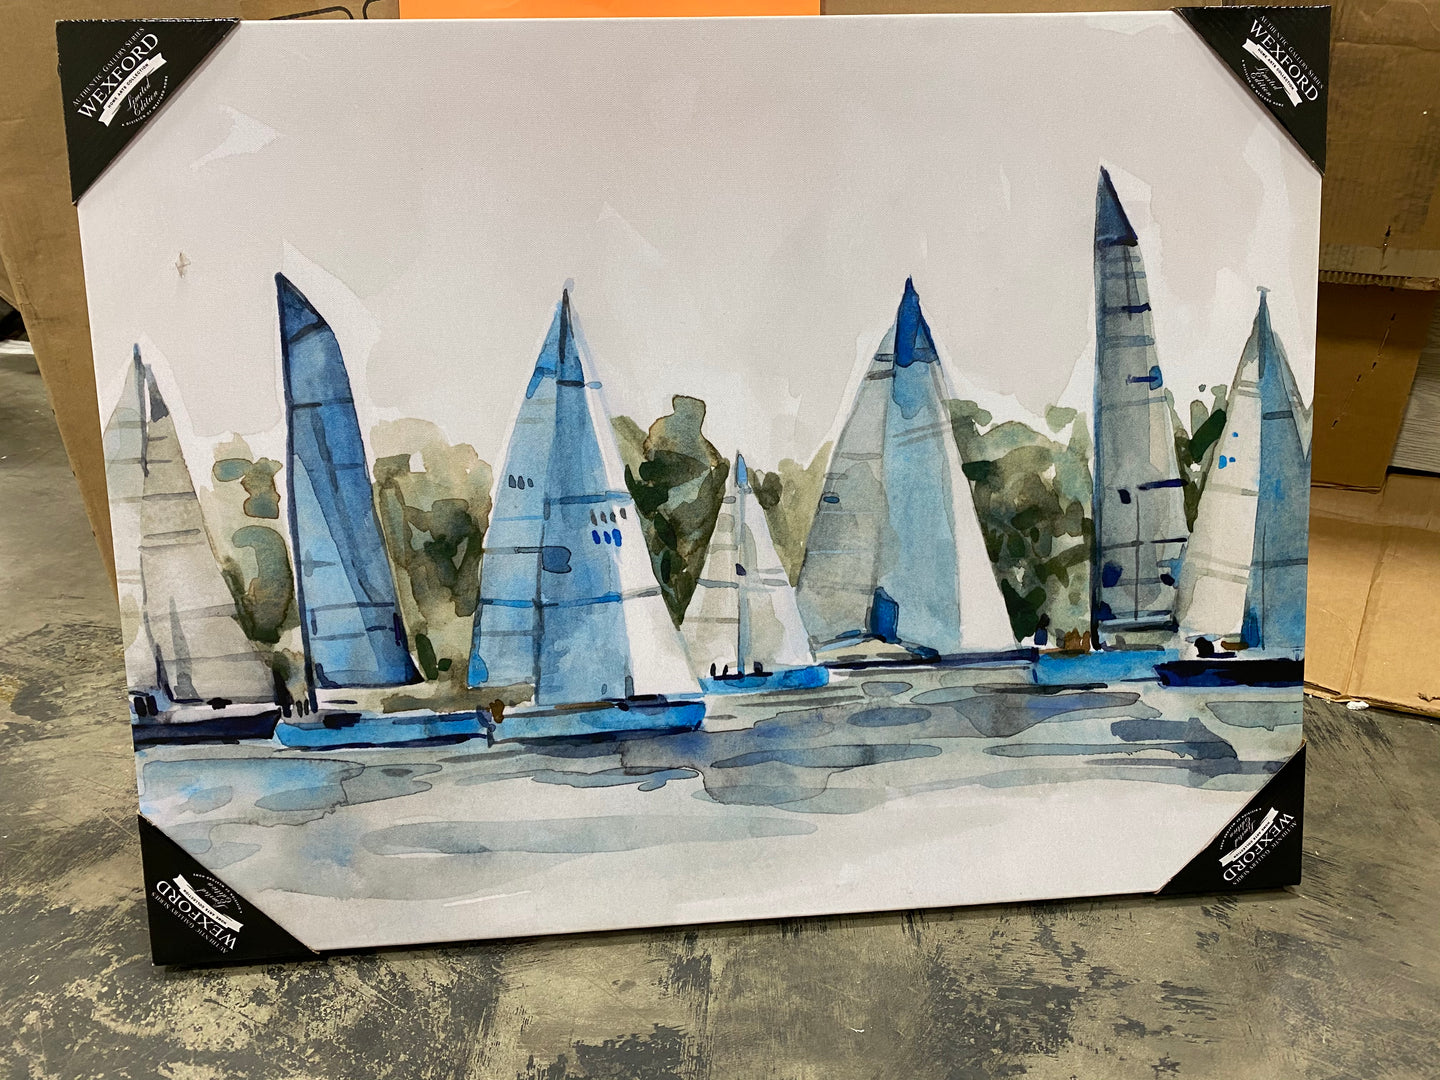 Sailboats Painting Print on Wrapped Canvas 24x32(1996RR)